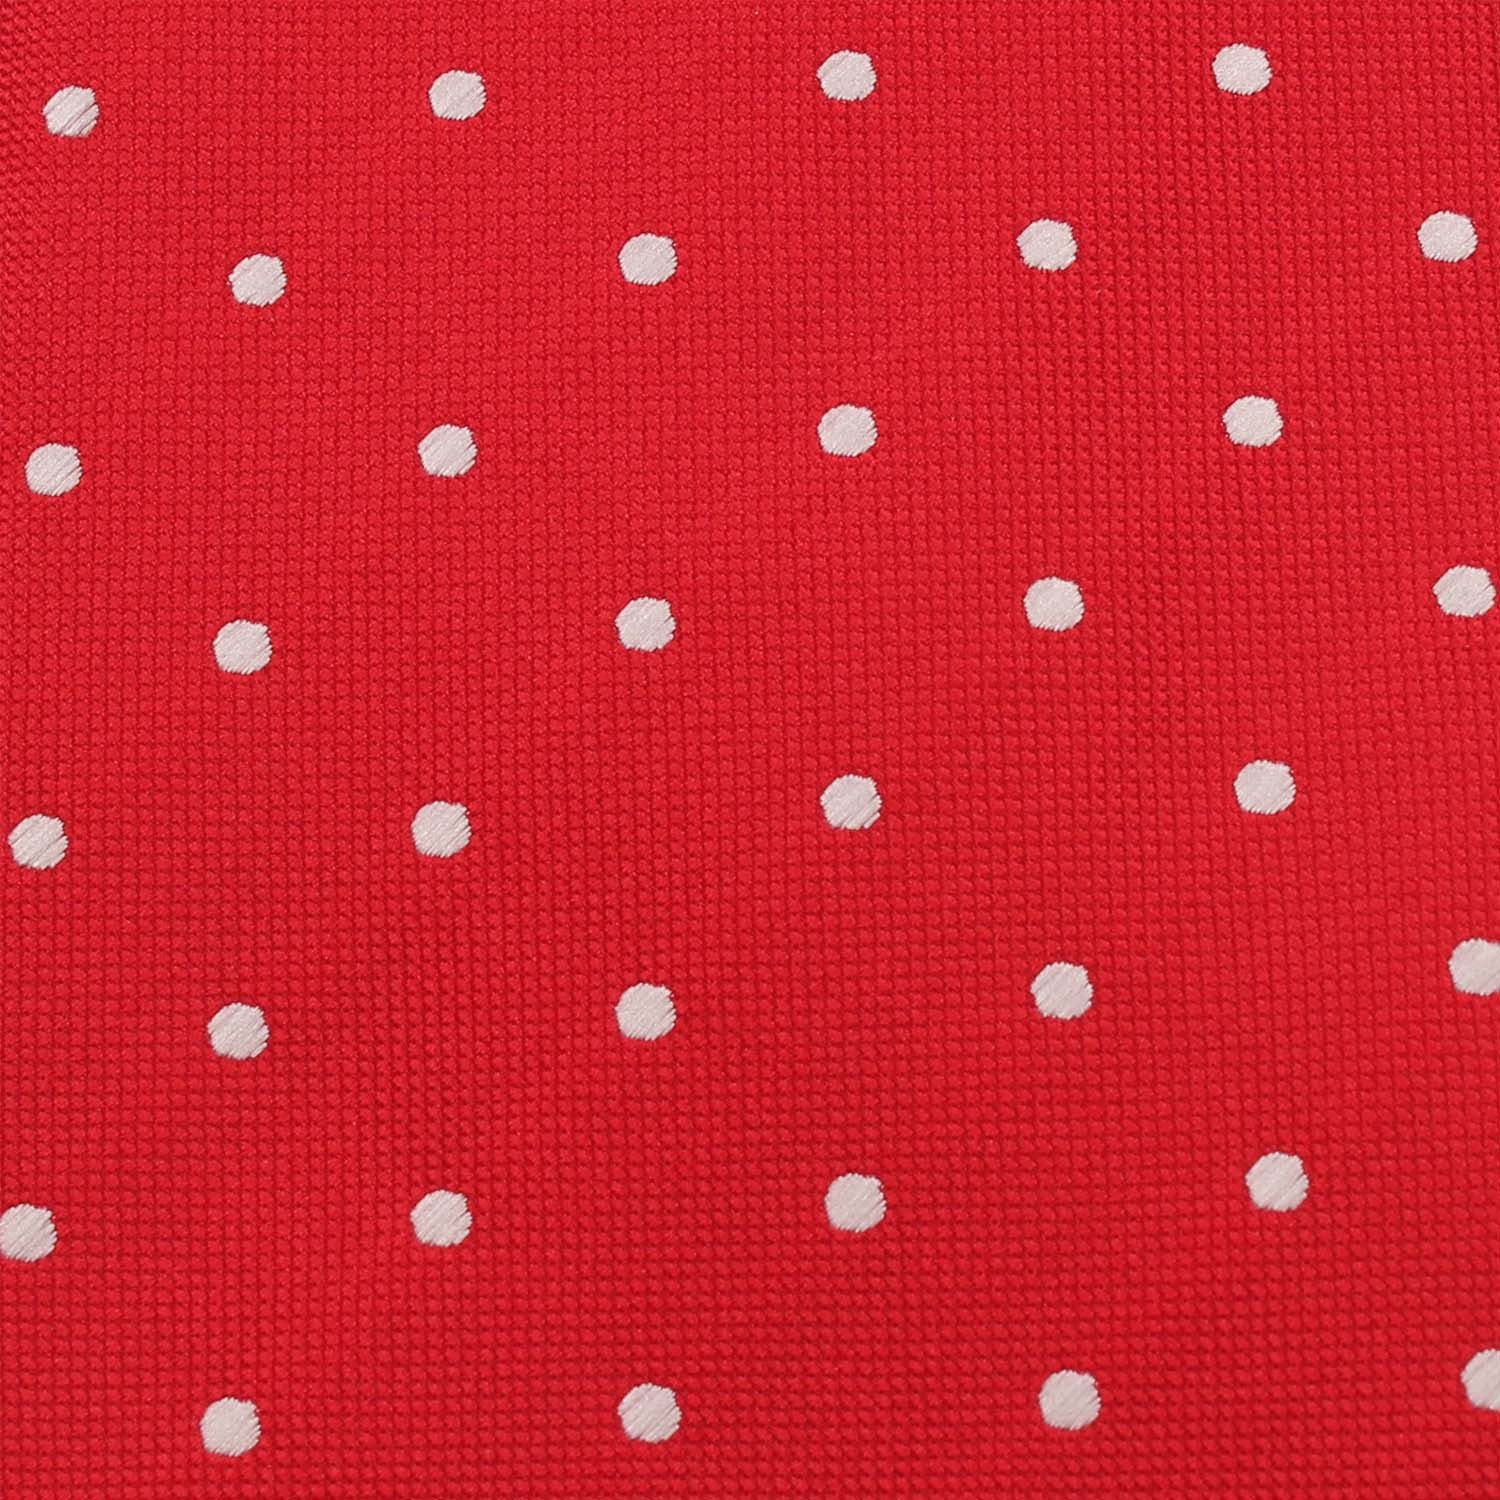 Red with White Polka Dots Fabric Skinny Tie X324